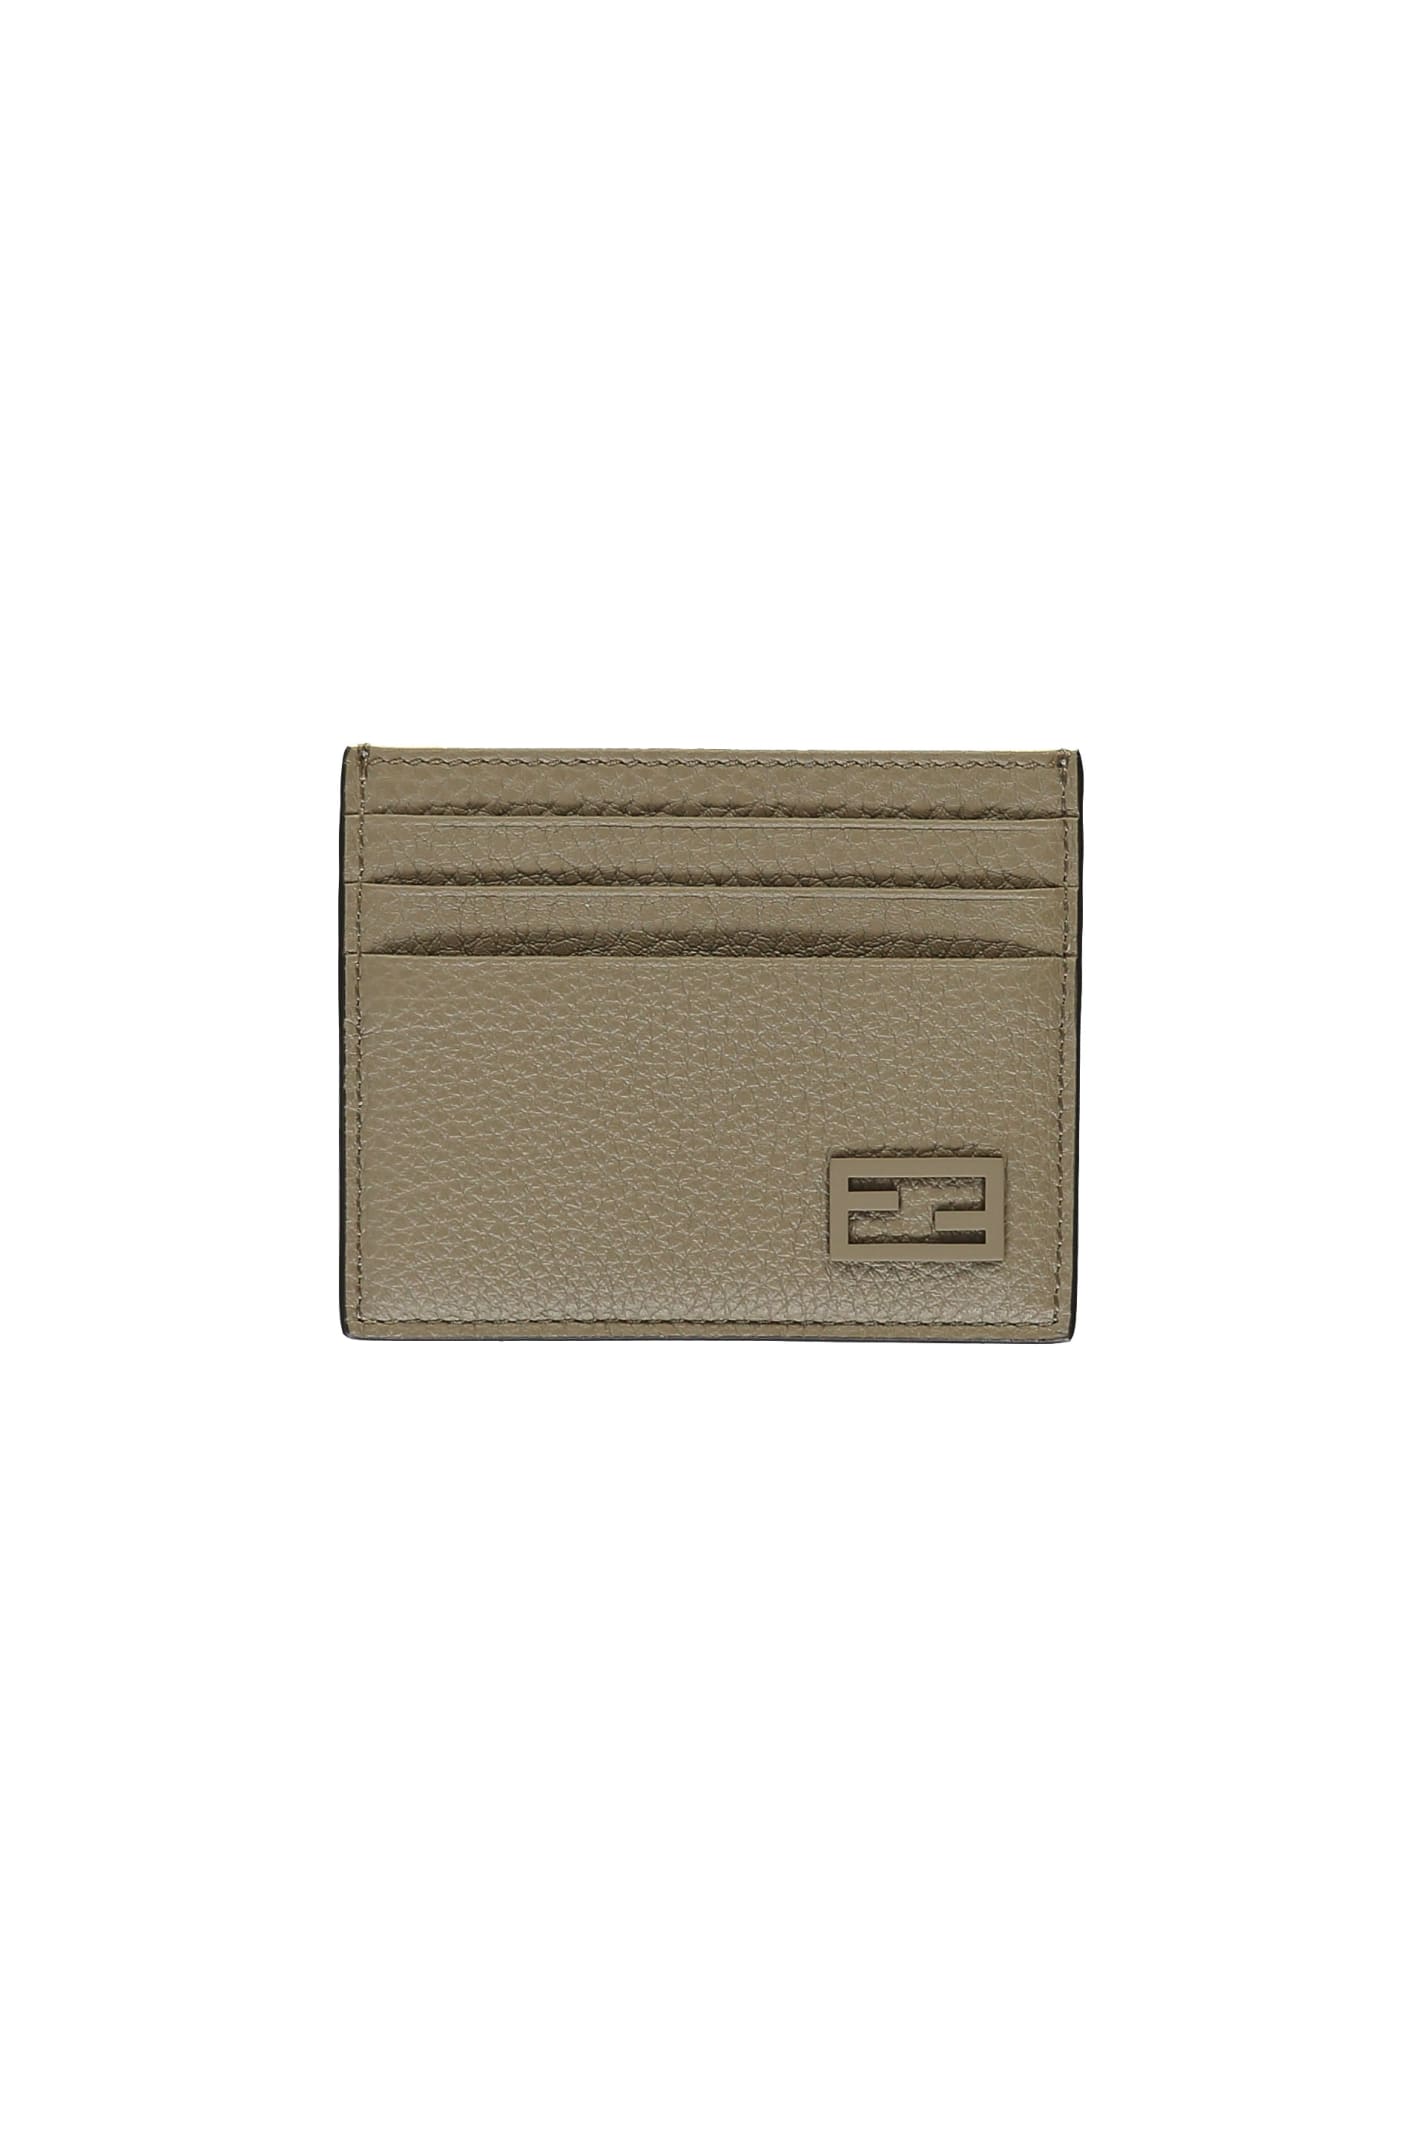 Fendi Leather Card Holder In Brown